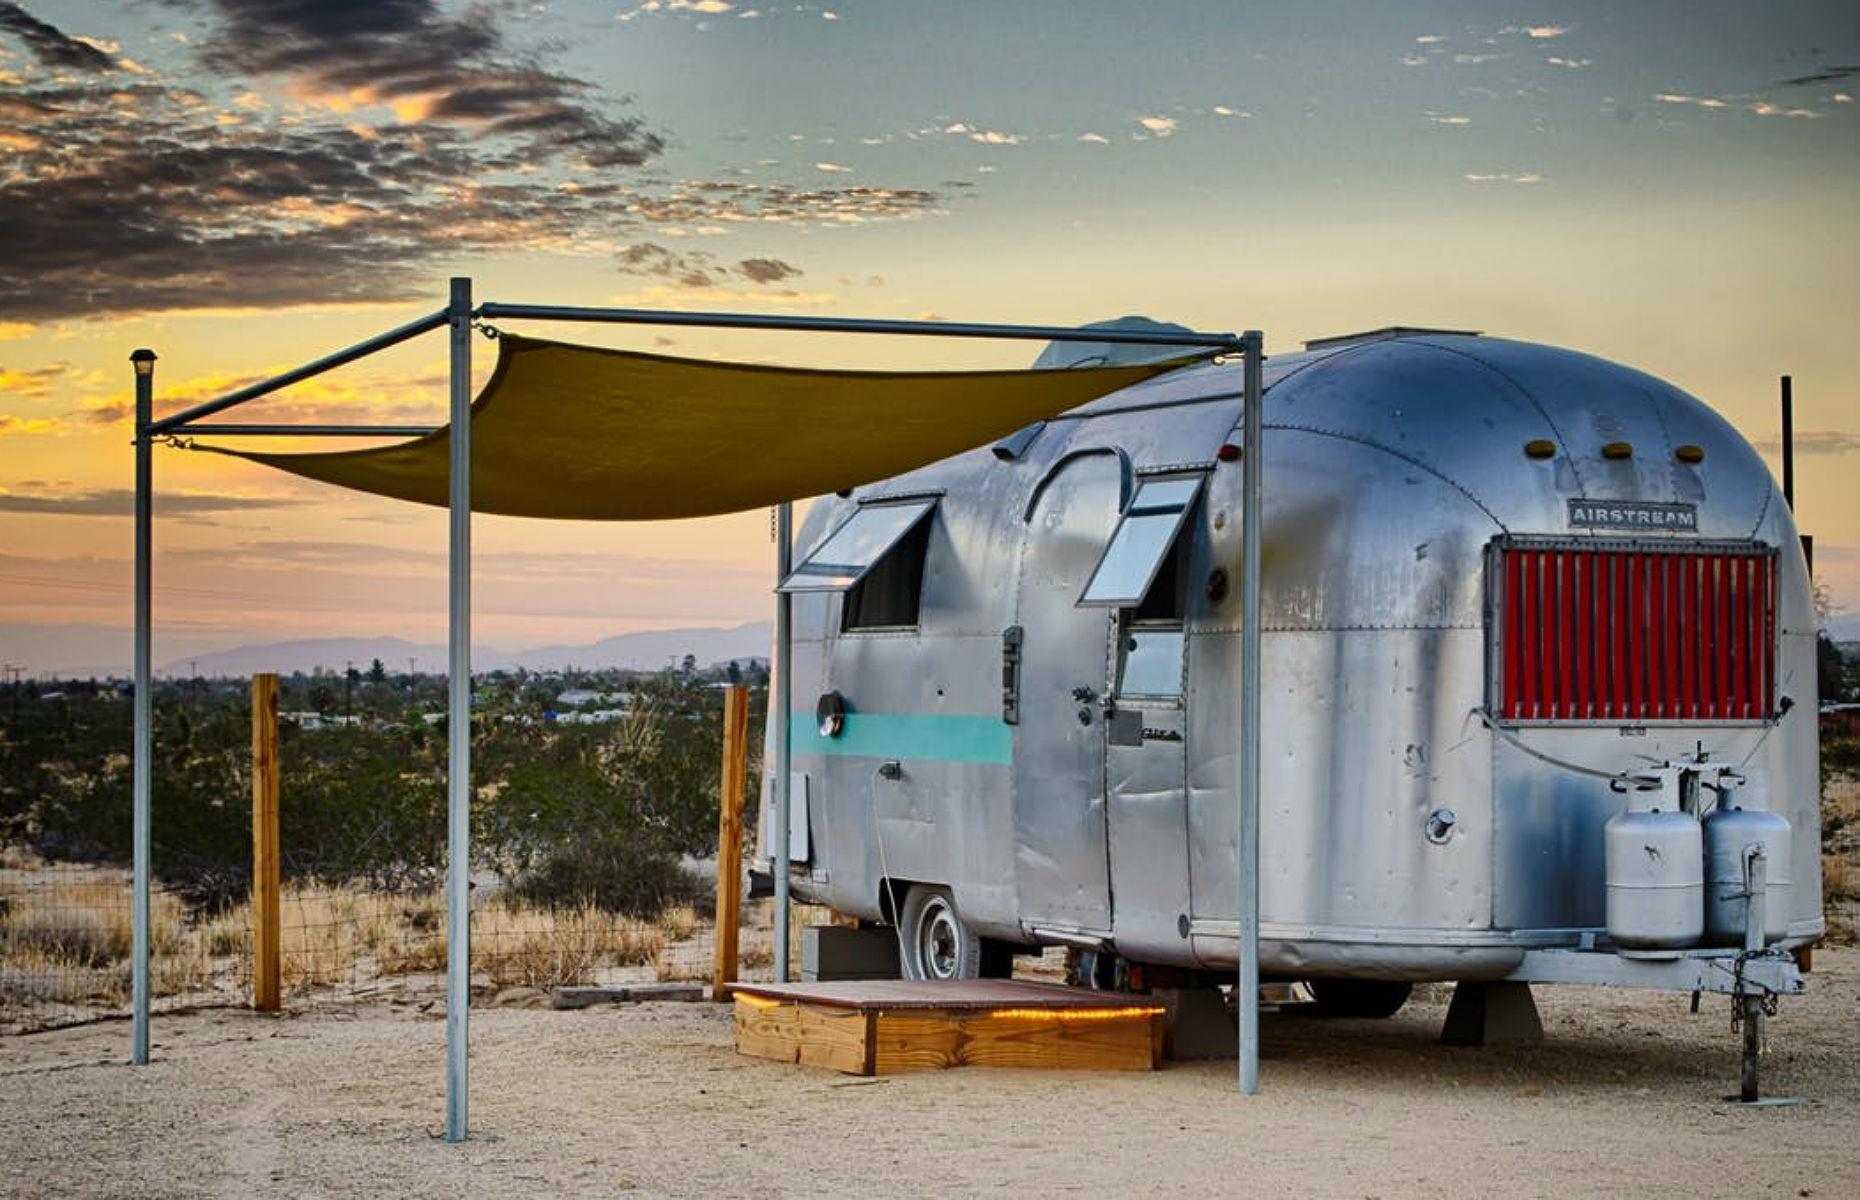 <p>These days, Airstreams don't mean slumming it on a barren strip of land. They're now the first choice of glampers and Instagram influencers – think stylish, cozy and comfortable.</p>  <p>We reveal the story behind the brand and take a look at the best Airstream refurbs and designs to inspire you to take the road in your own tiny home on wheels. Click or scroll on for more...</p>